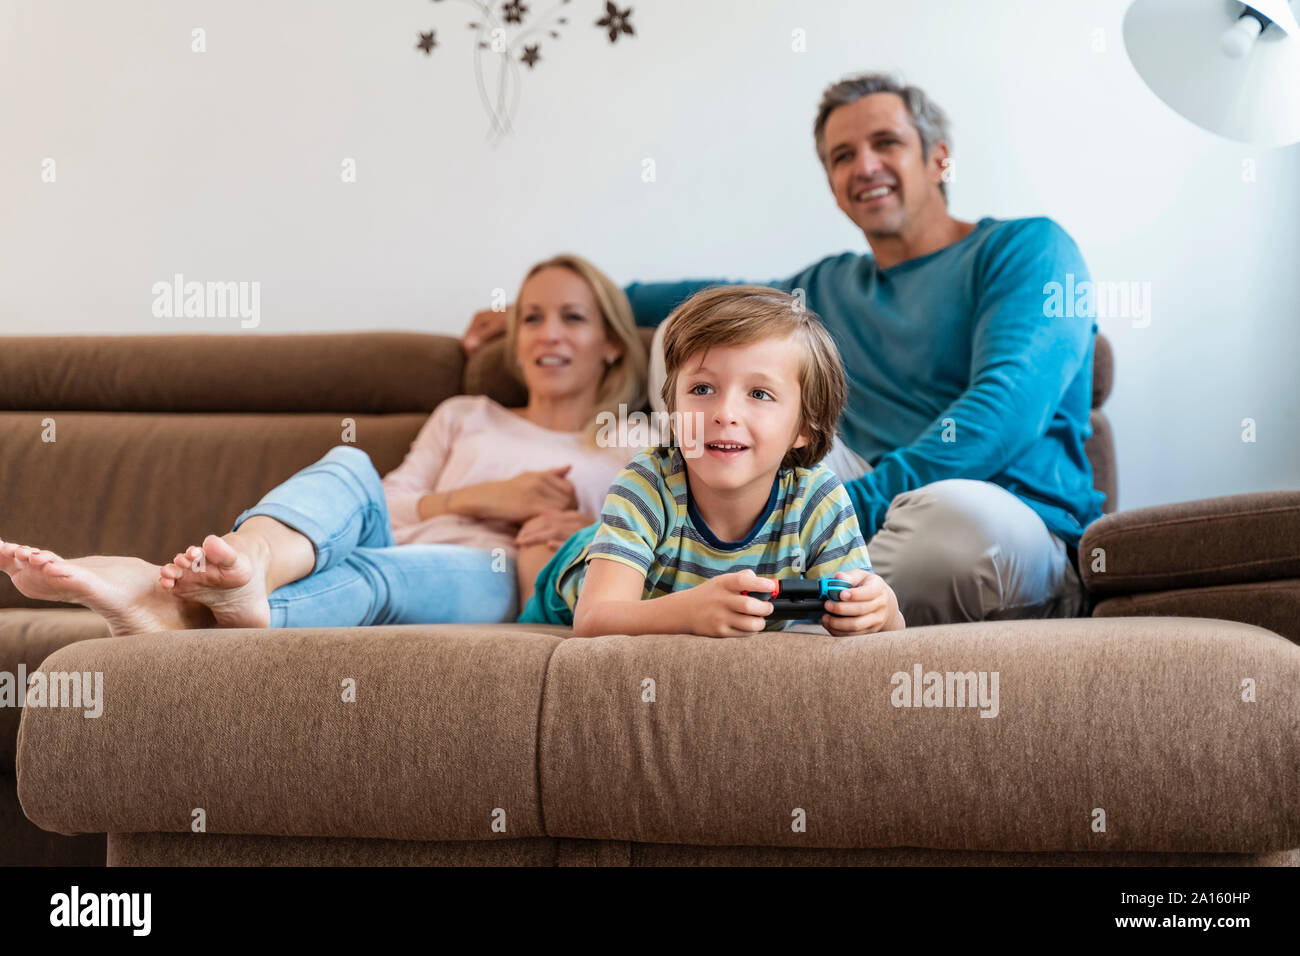 Boy lying on couch at home playing video game with parents watching Stock Photo